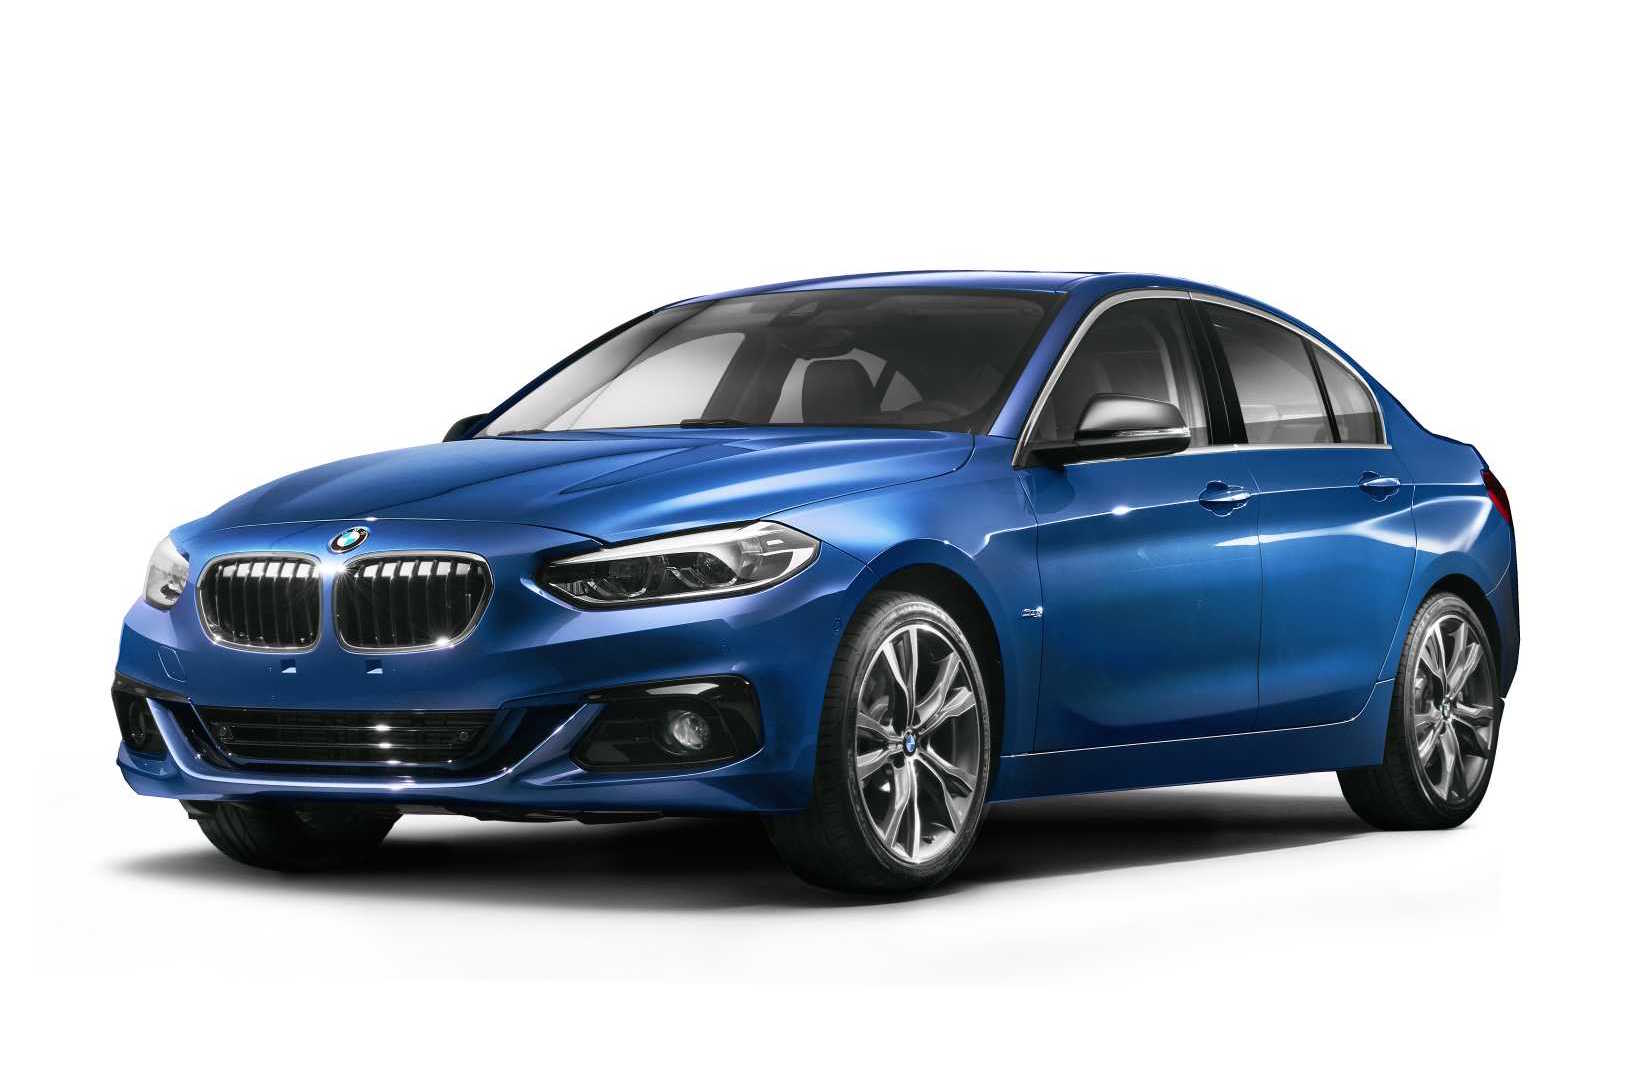 BMW 1 Series Sedan revealed, for China only